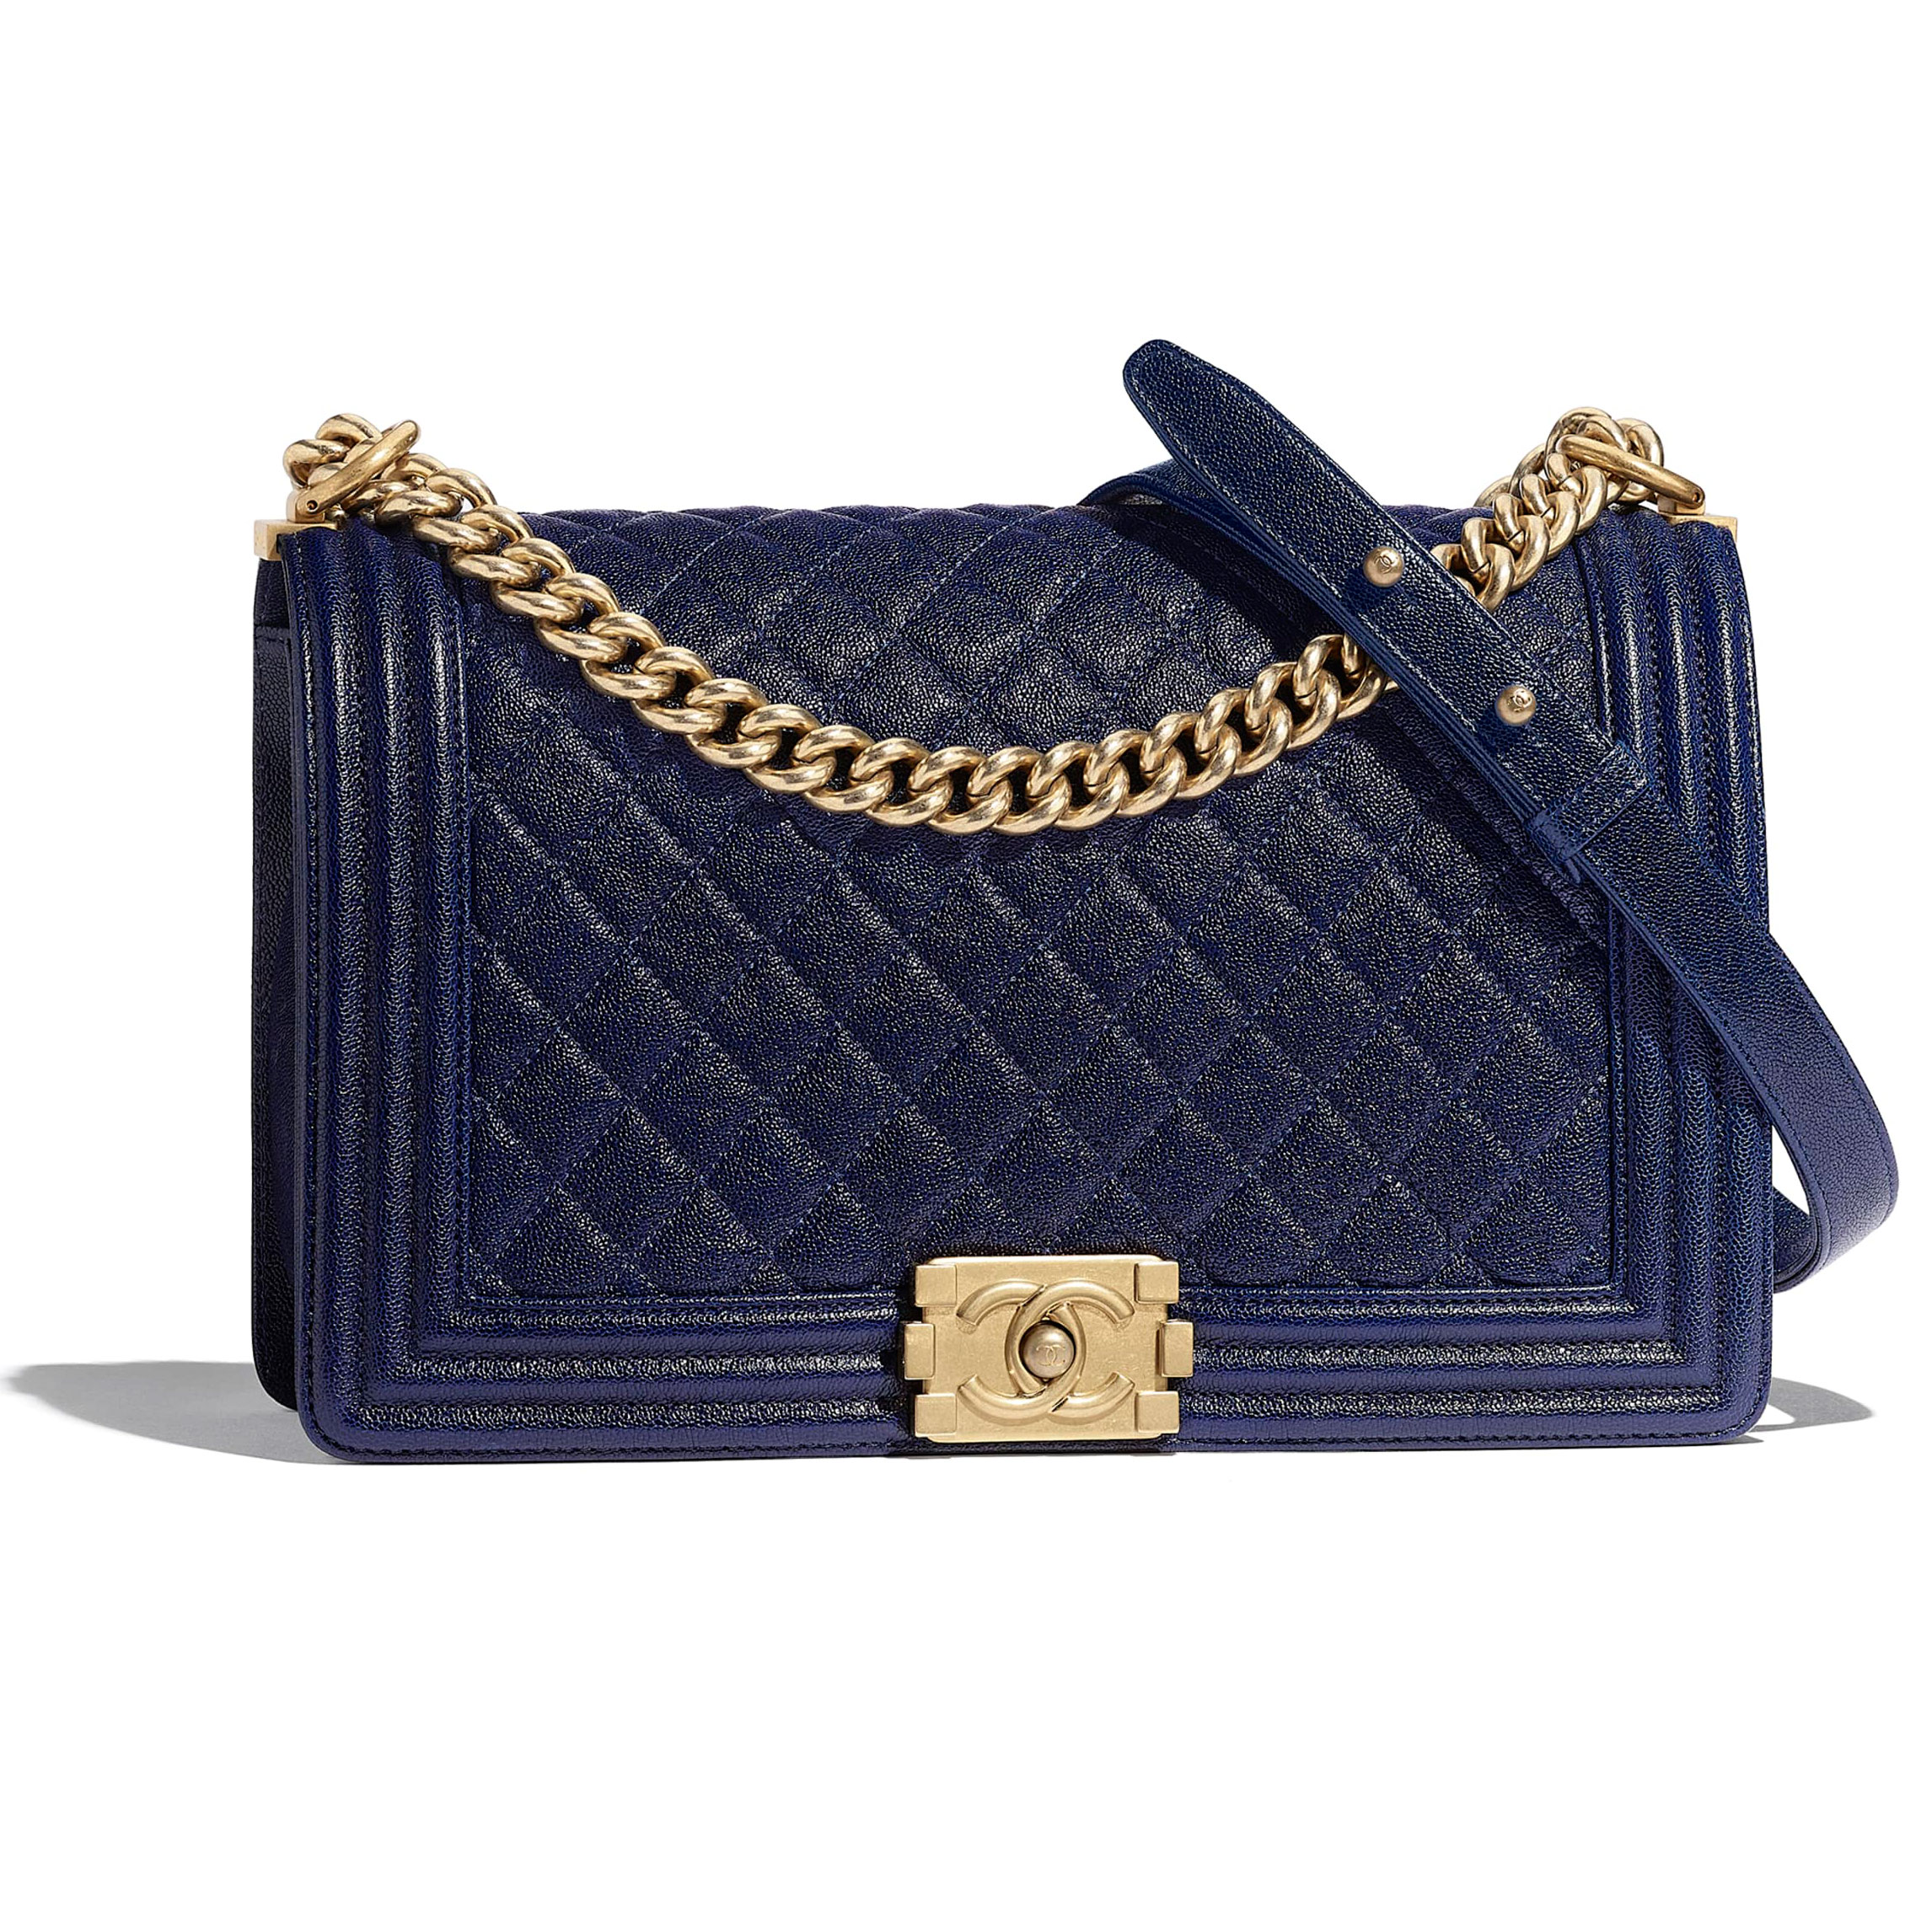 10 Luxury Handbags to Save Up for This Season - theFashionSpot